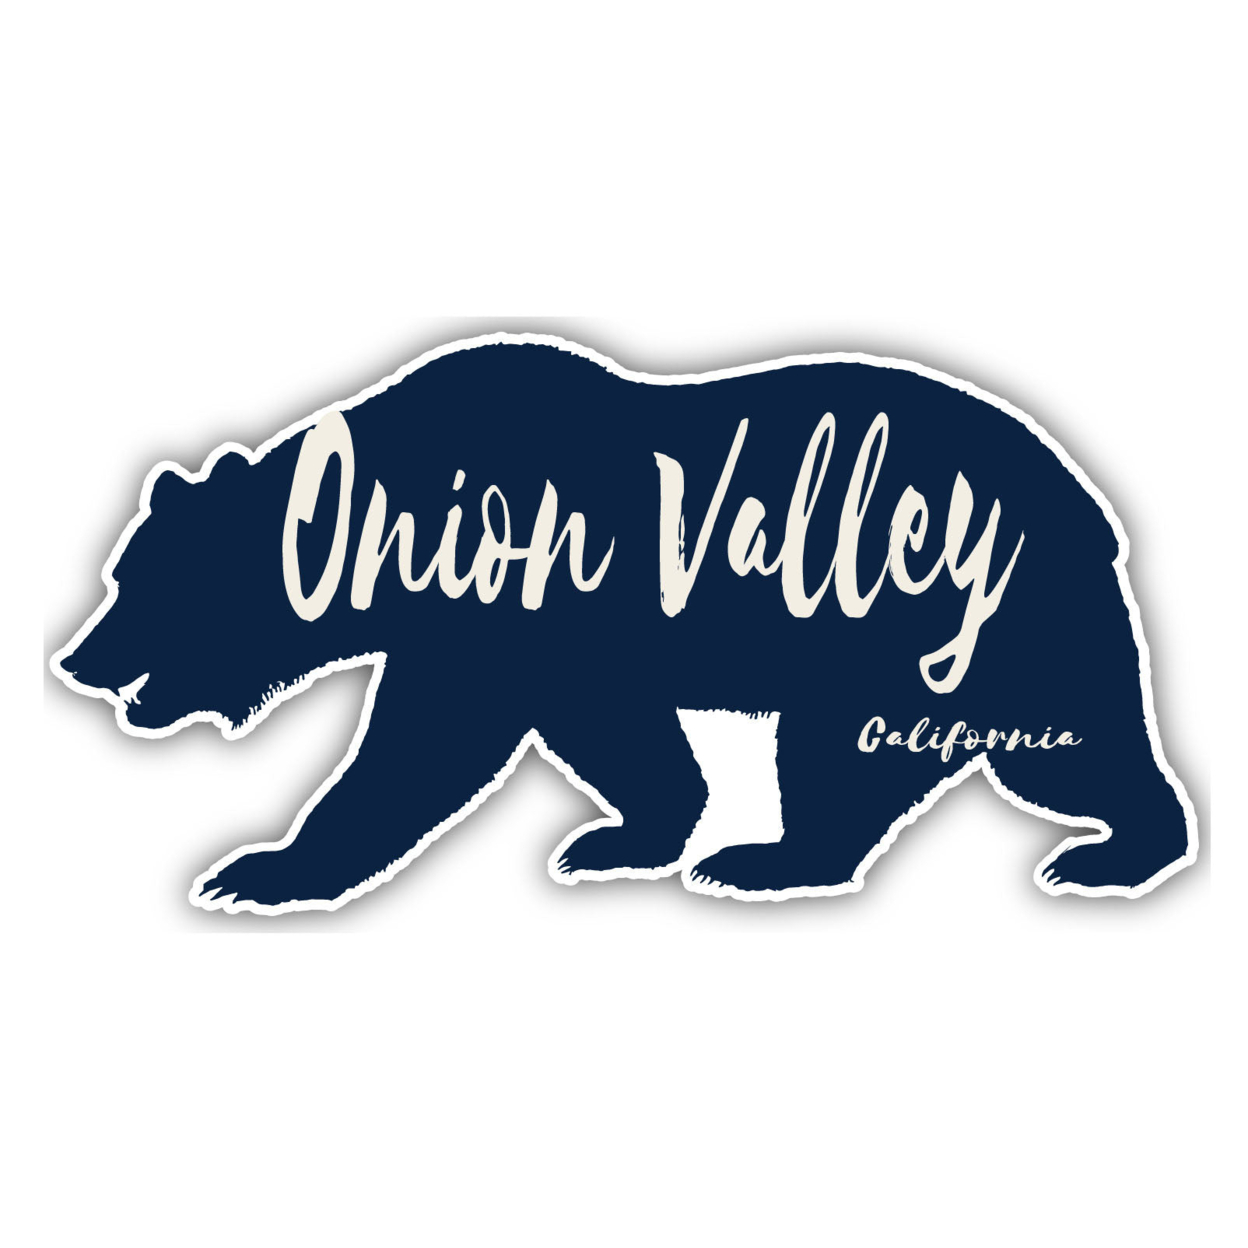 Onion Valley California Souvenir Decorative Stickers (Choose Theme And Size) - Single Unit, 4-Inch, Great Outdoors